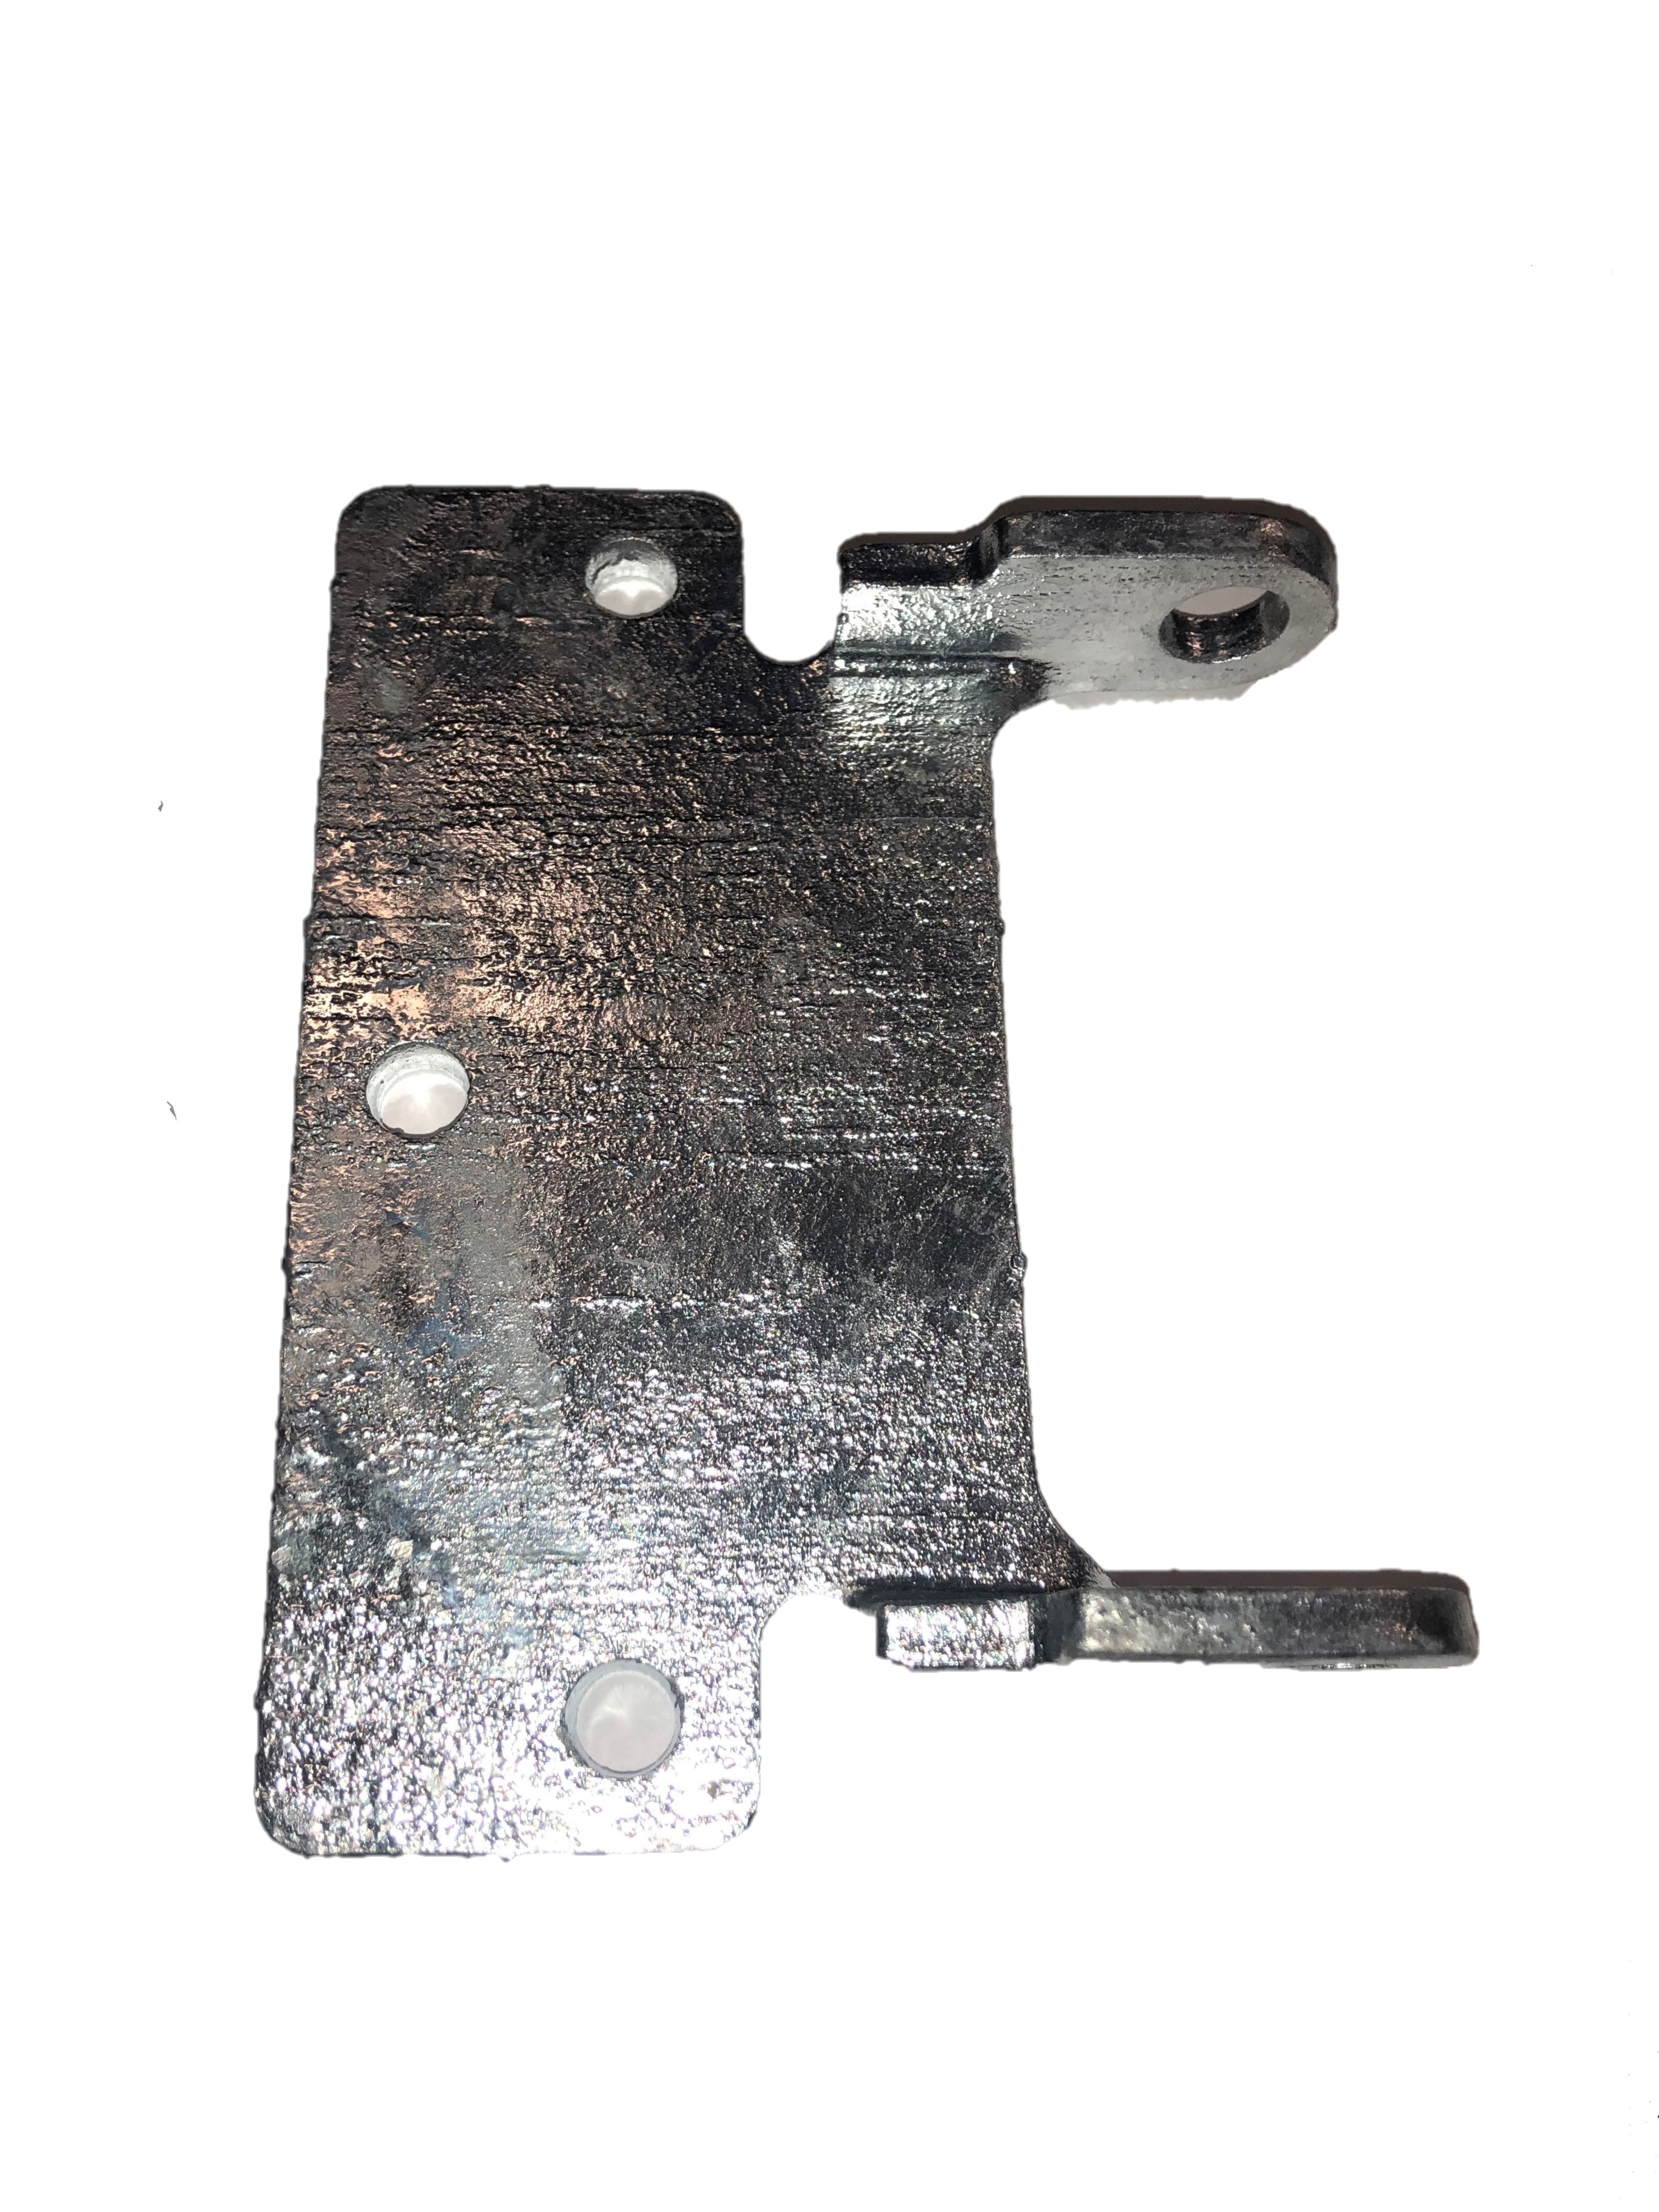 Carbon steel hinge butt with galvanized finish 30-5897-1-13